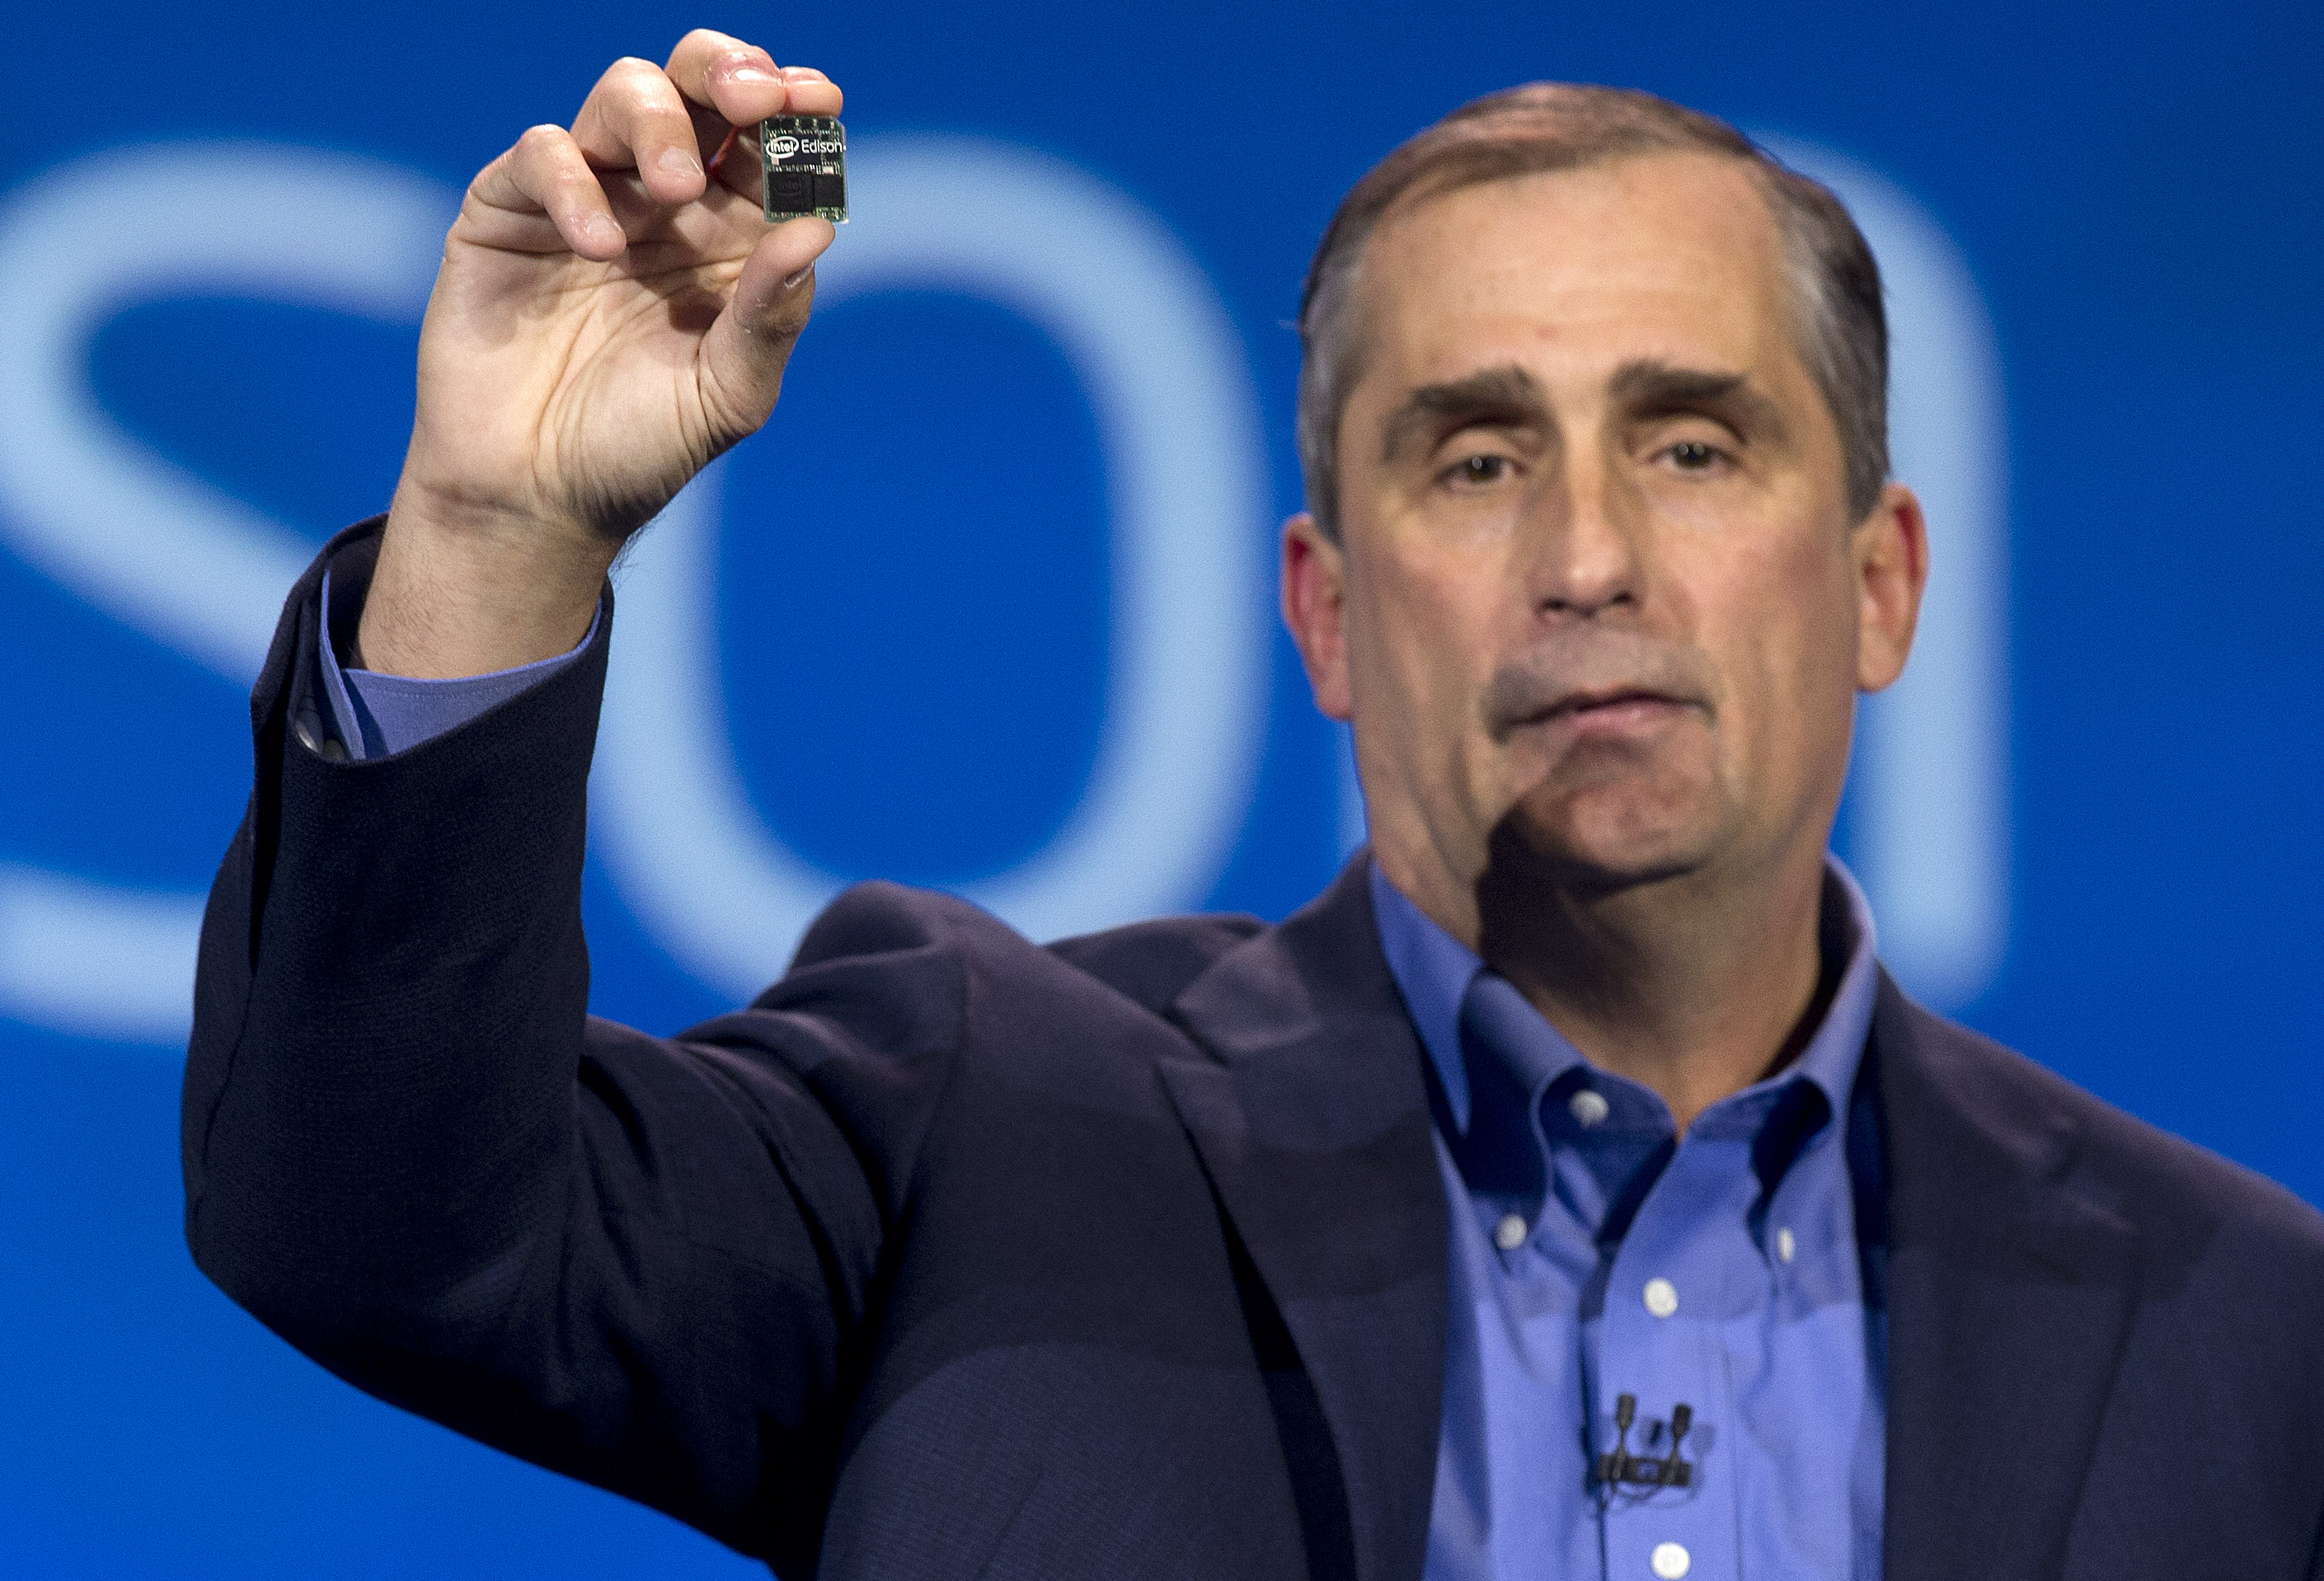 ThinkProgress: Intel Announces First 'Conflict-Free' Microprocessor